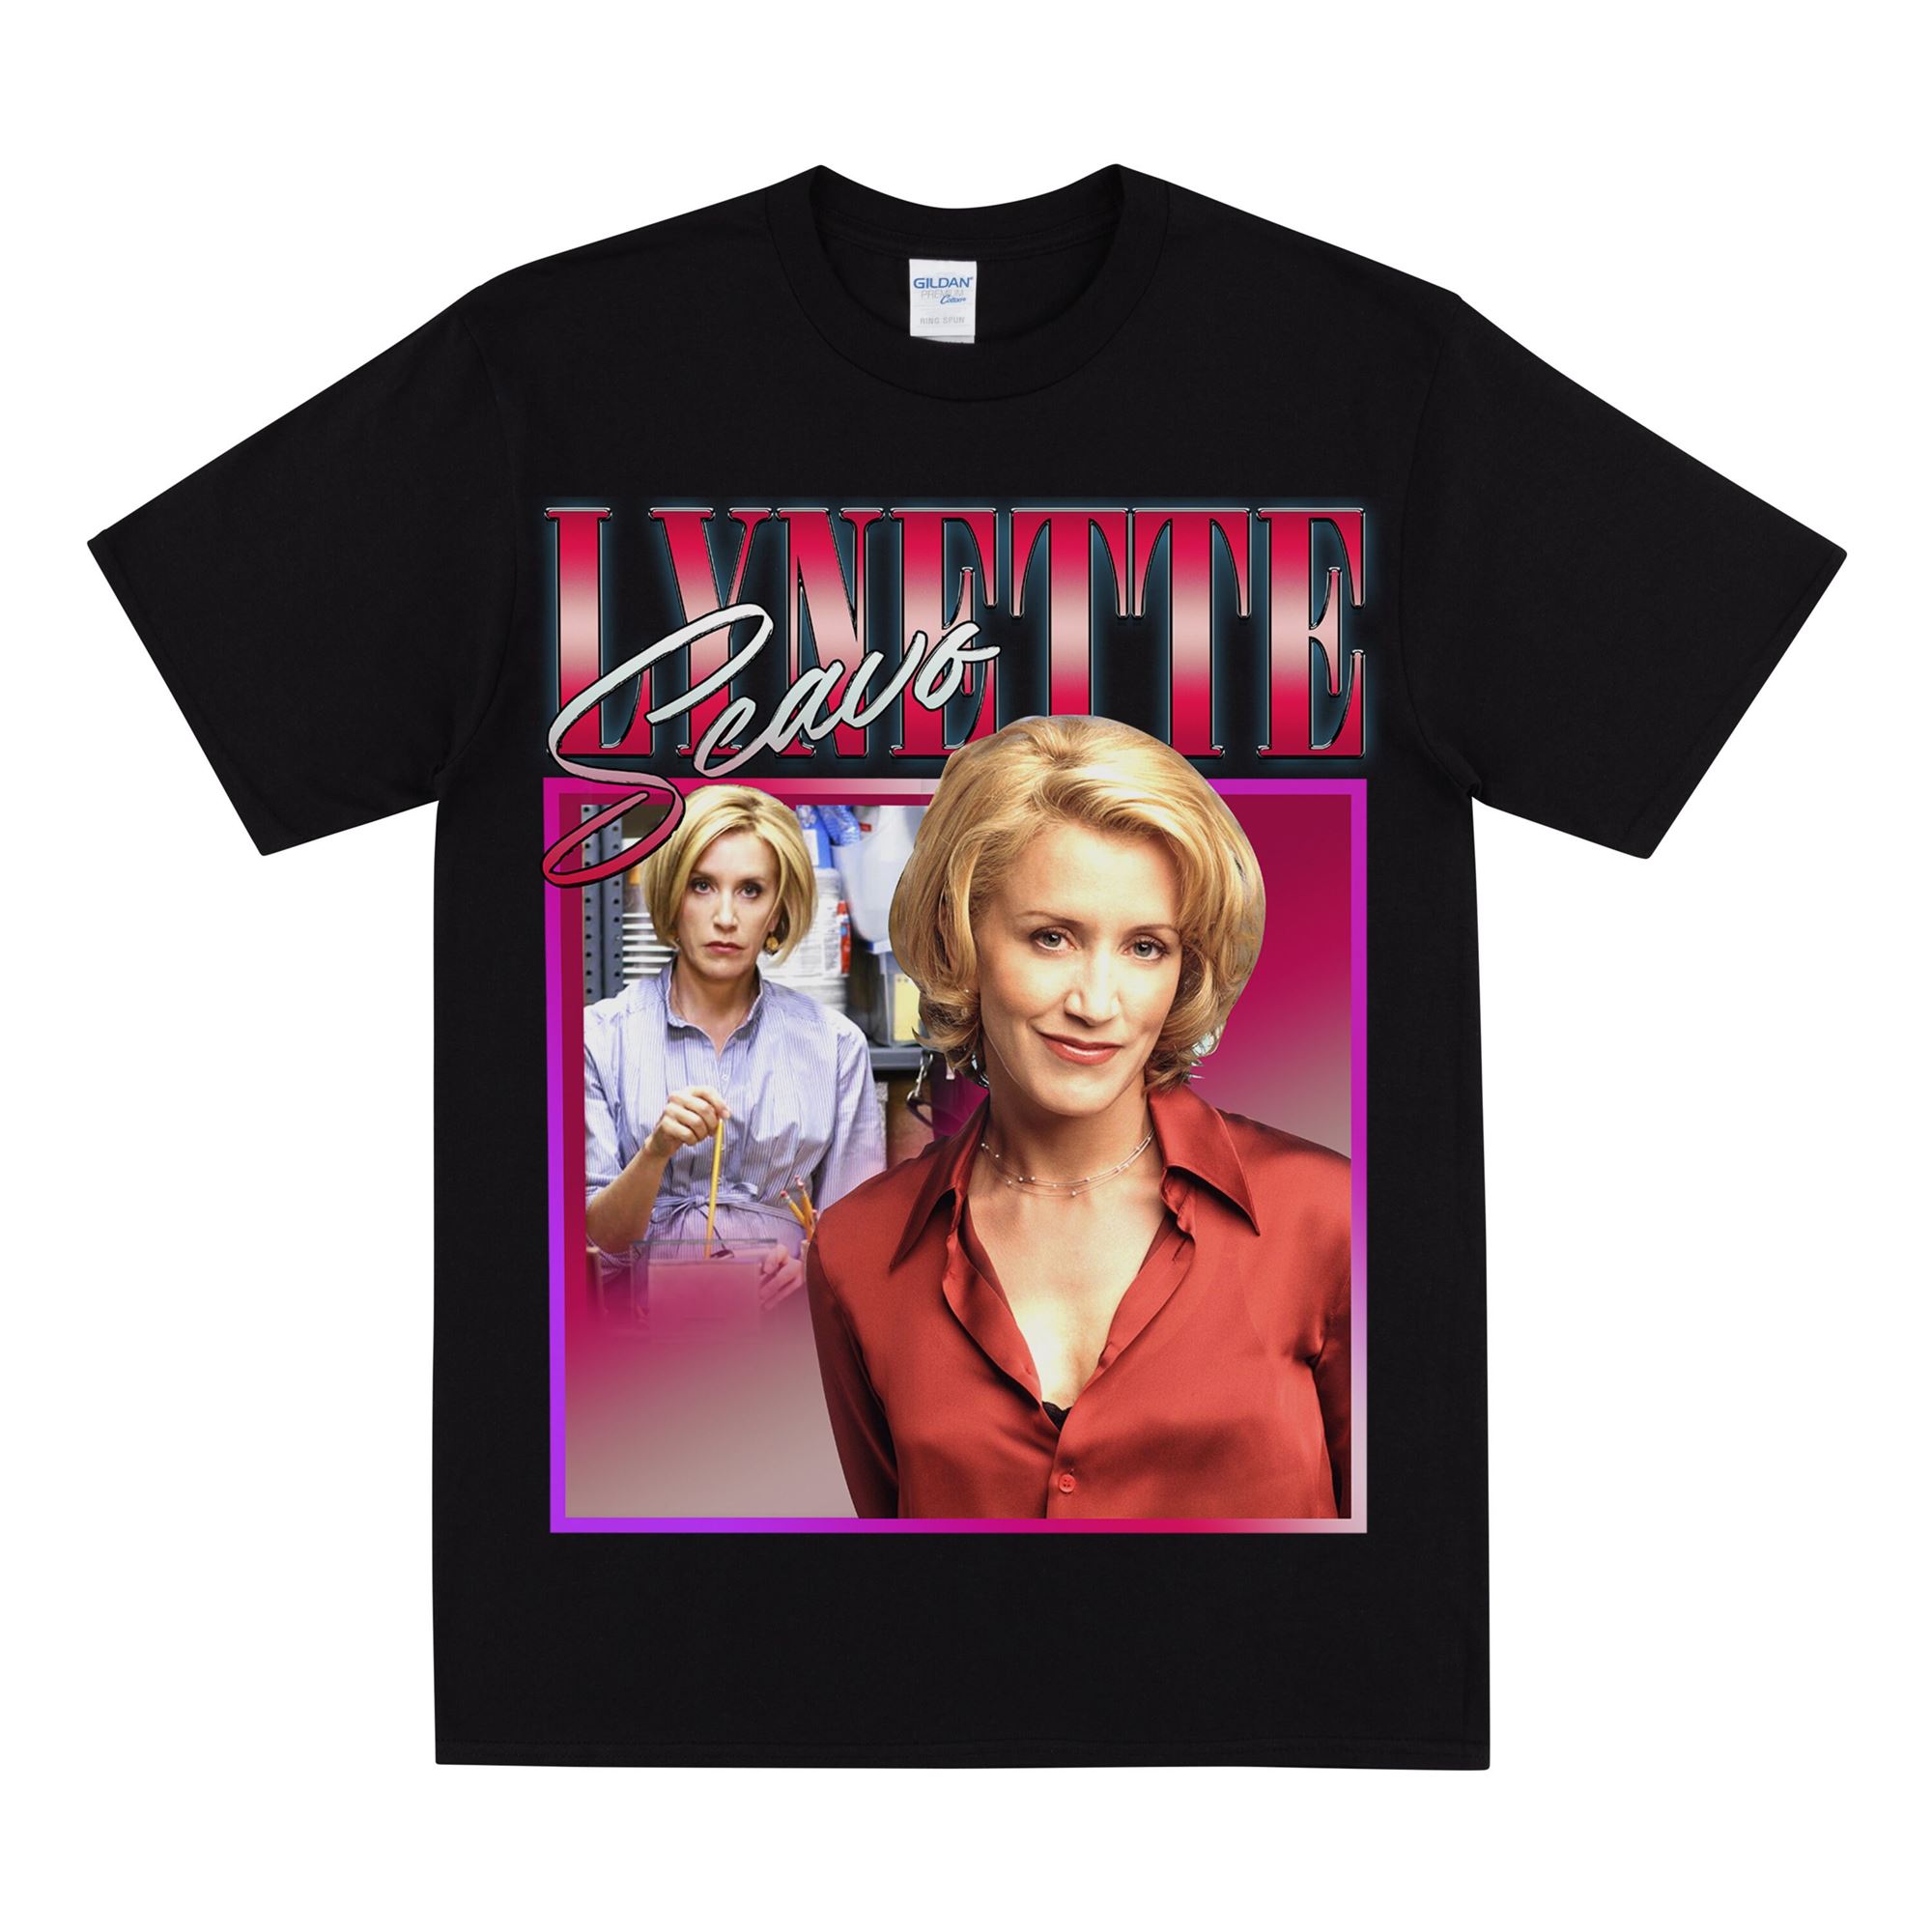 Lynette Scavo Homage T-shirt For Women Desperate Housewives Fans Mens Unisex Printed T Shirt Tv Comedy Series Funny Tee